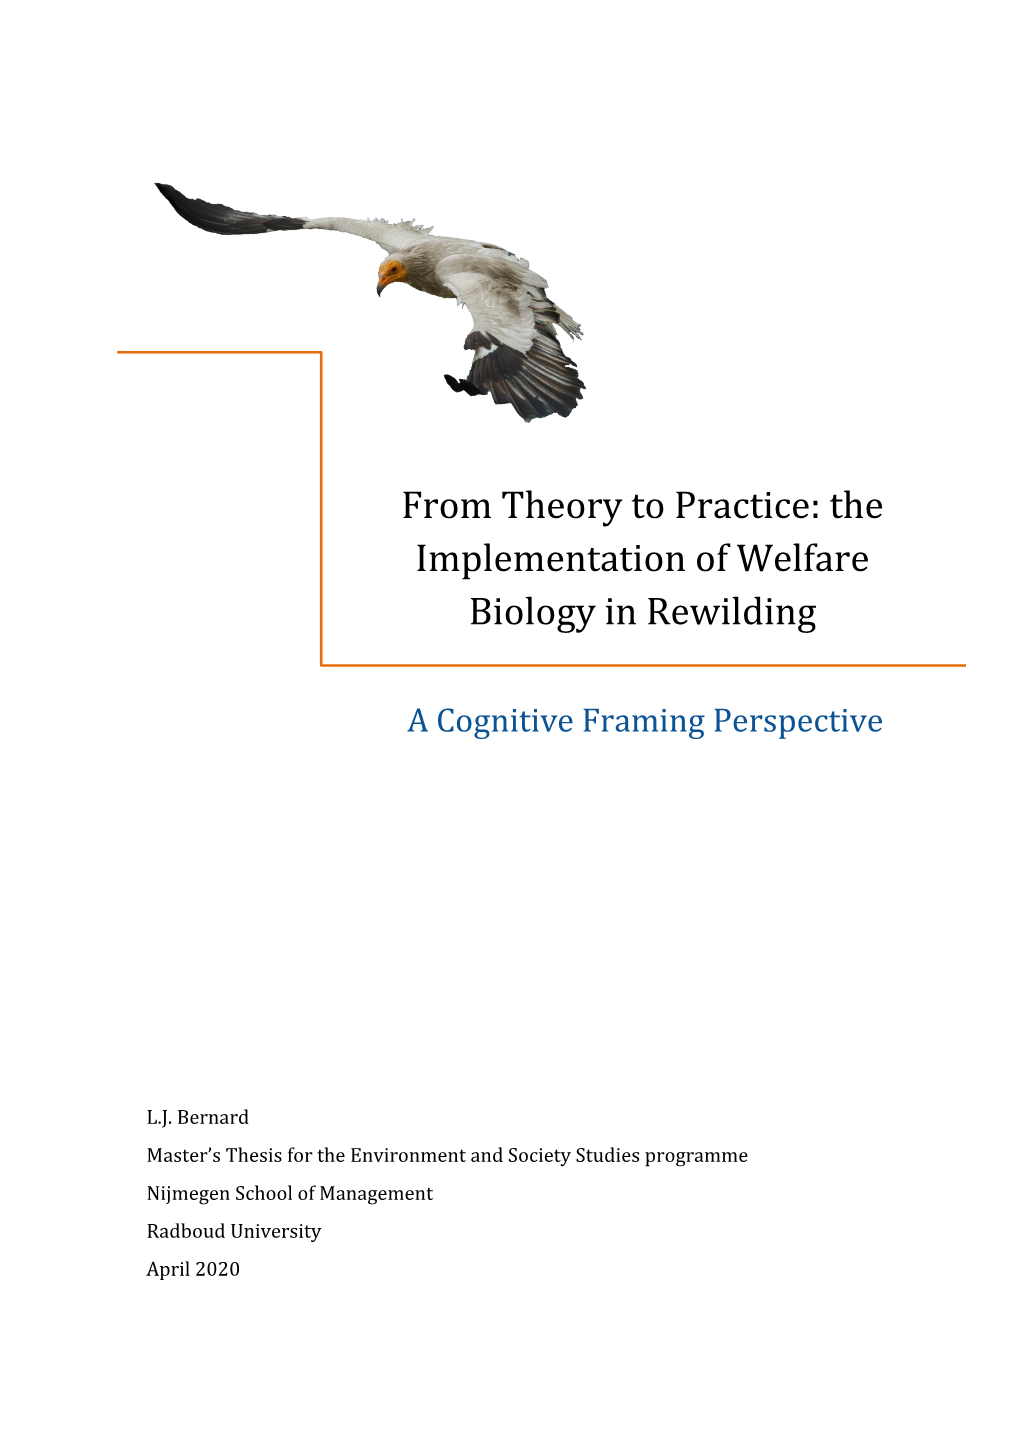 The Implementation of Welfare Biology in Rewilding